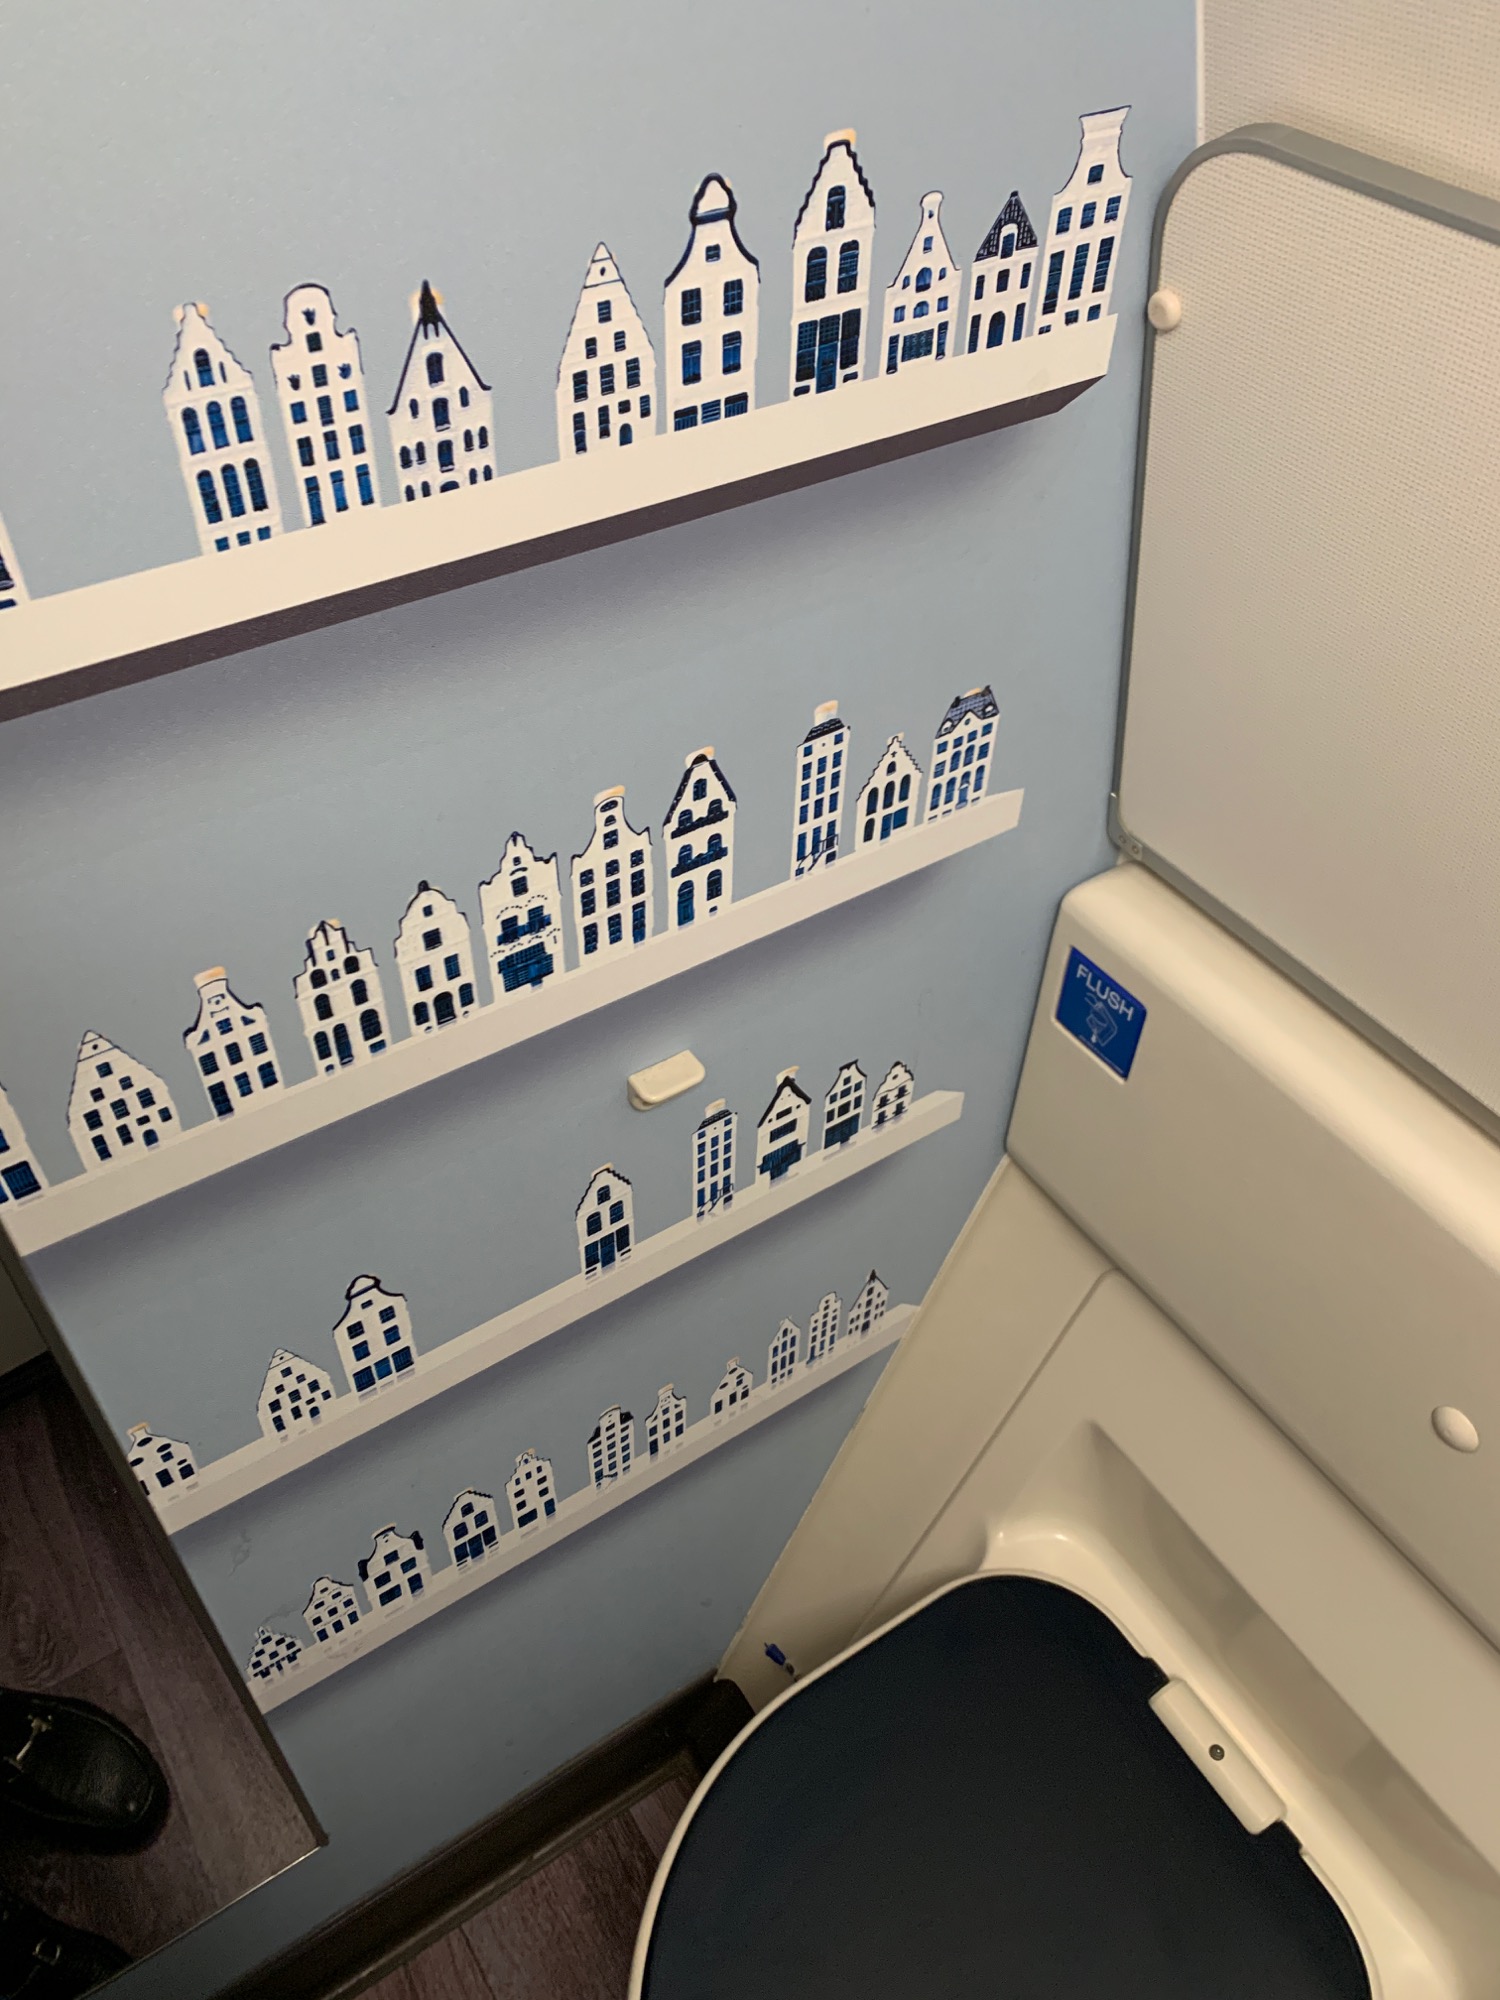 a shelf with paper cut out of houses on it